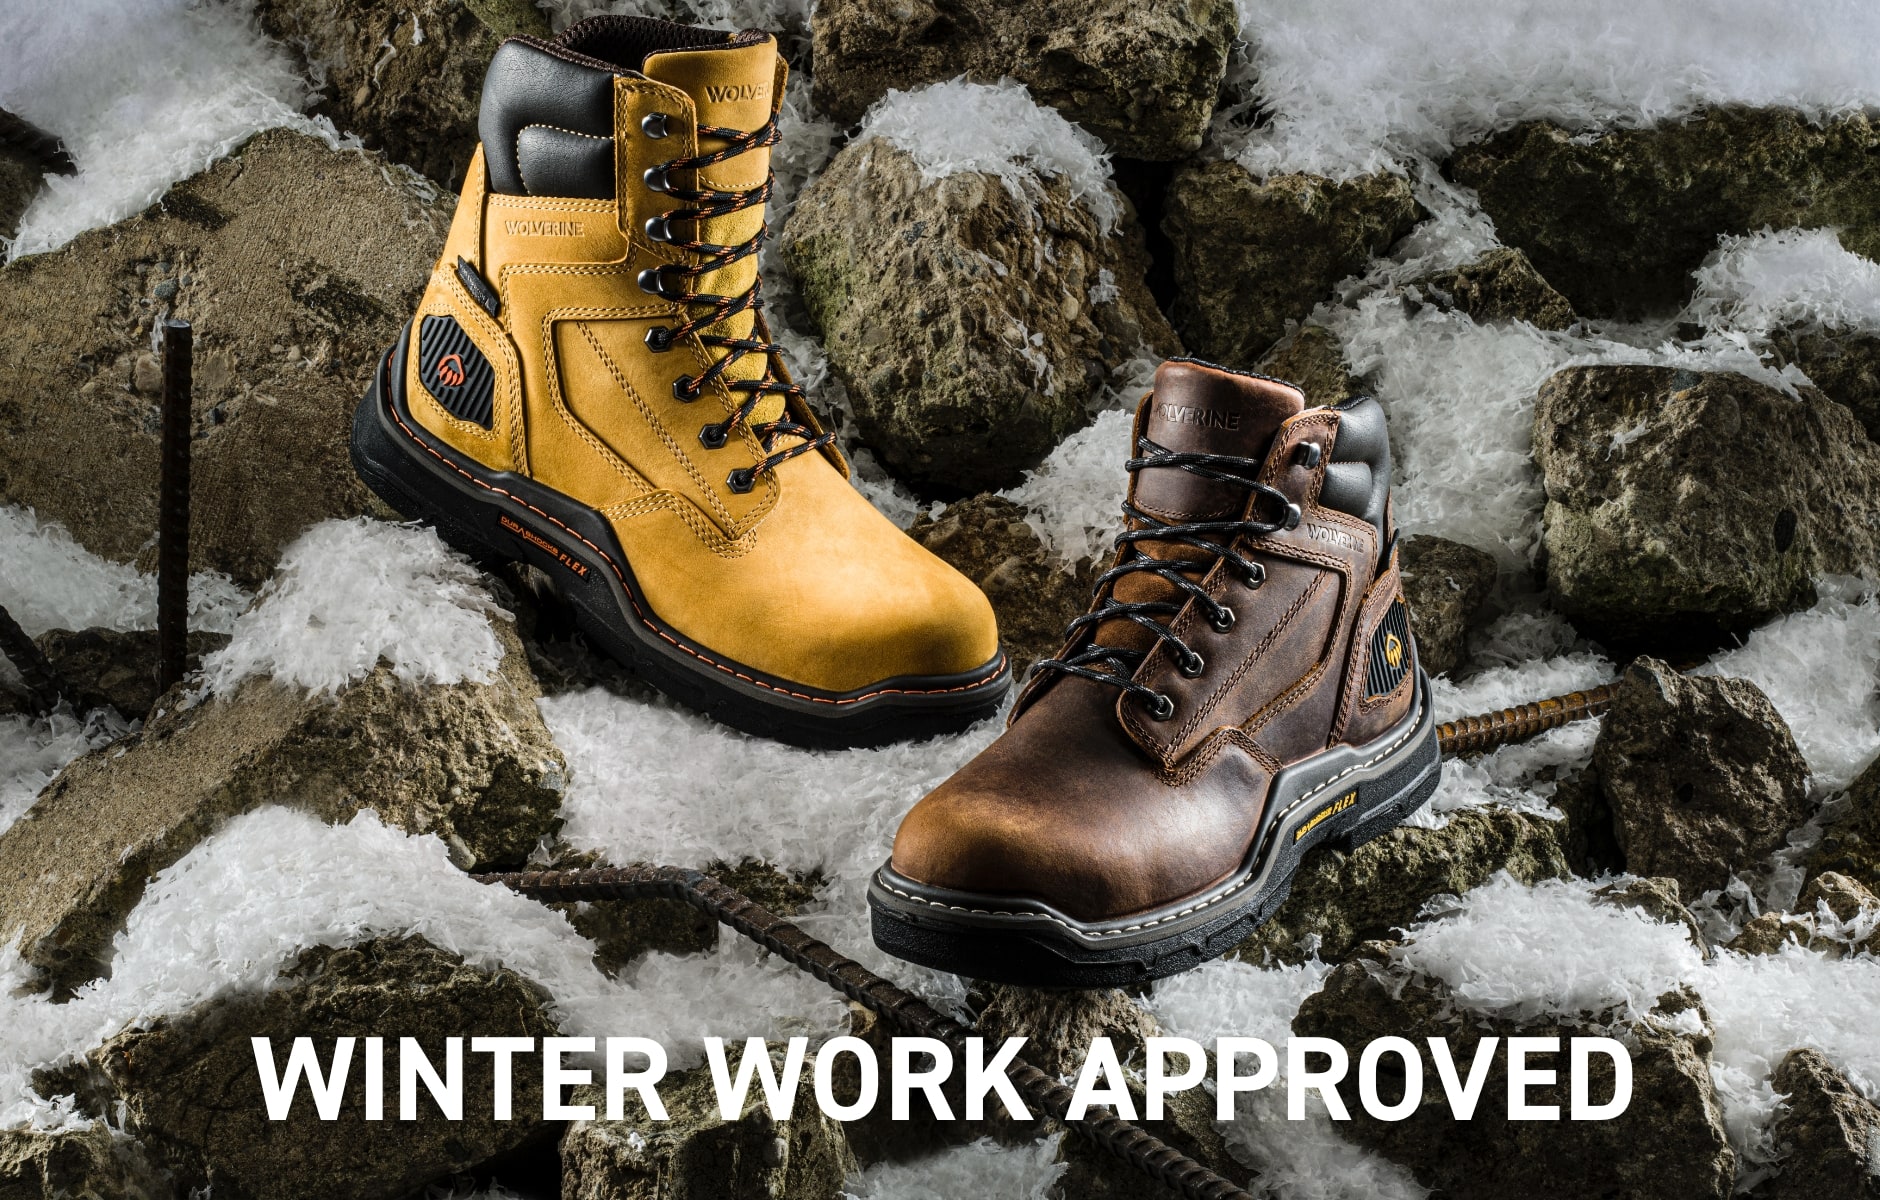 Winter Work Approved.